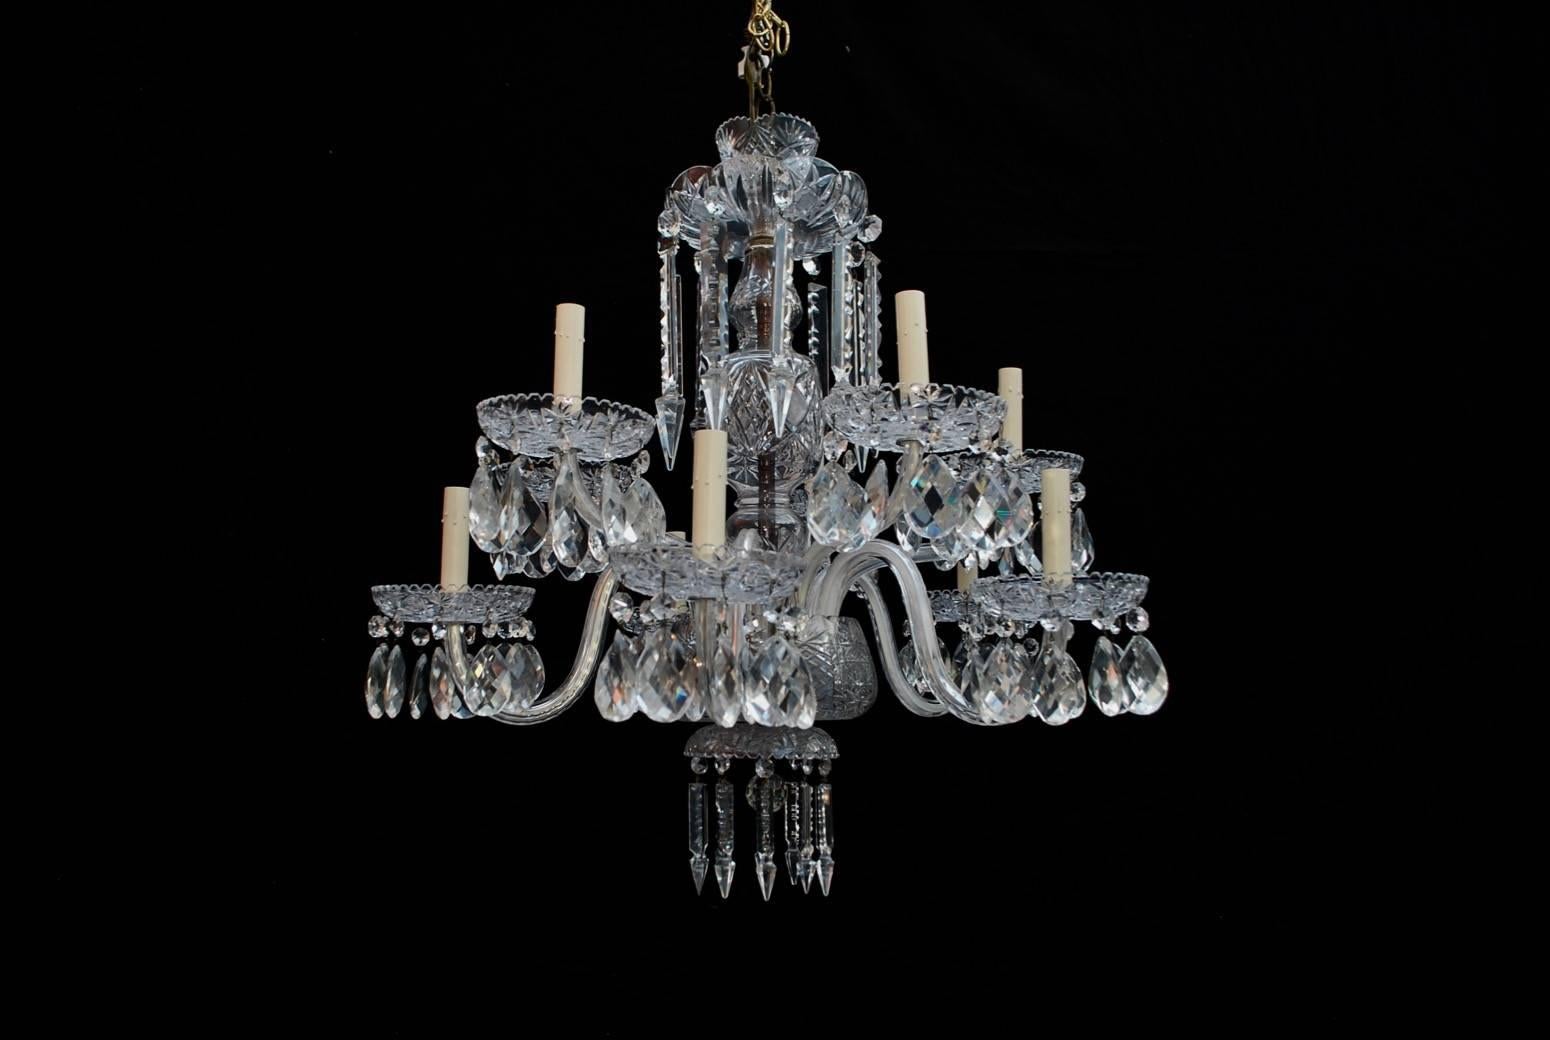 The qualities of the crystal is amazing, this chandelier is more impressive in person, hard to capture it on a picture.

    